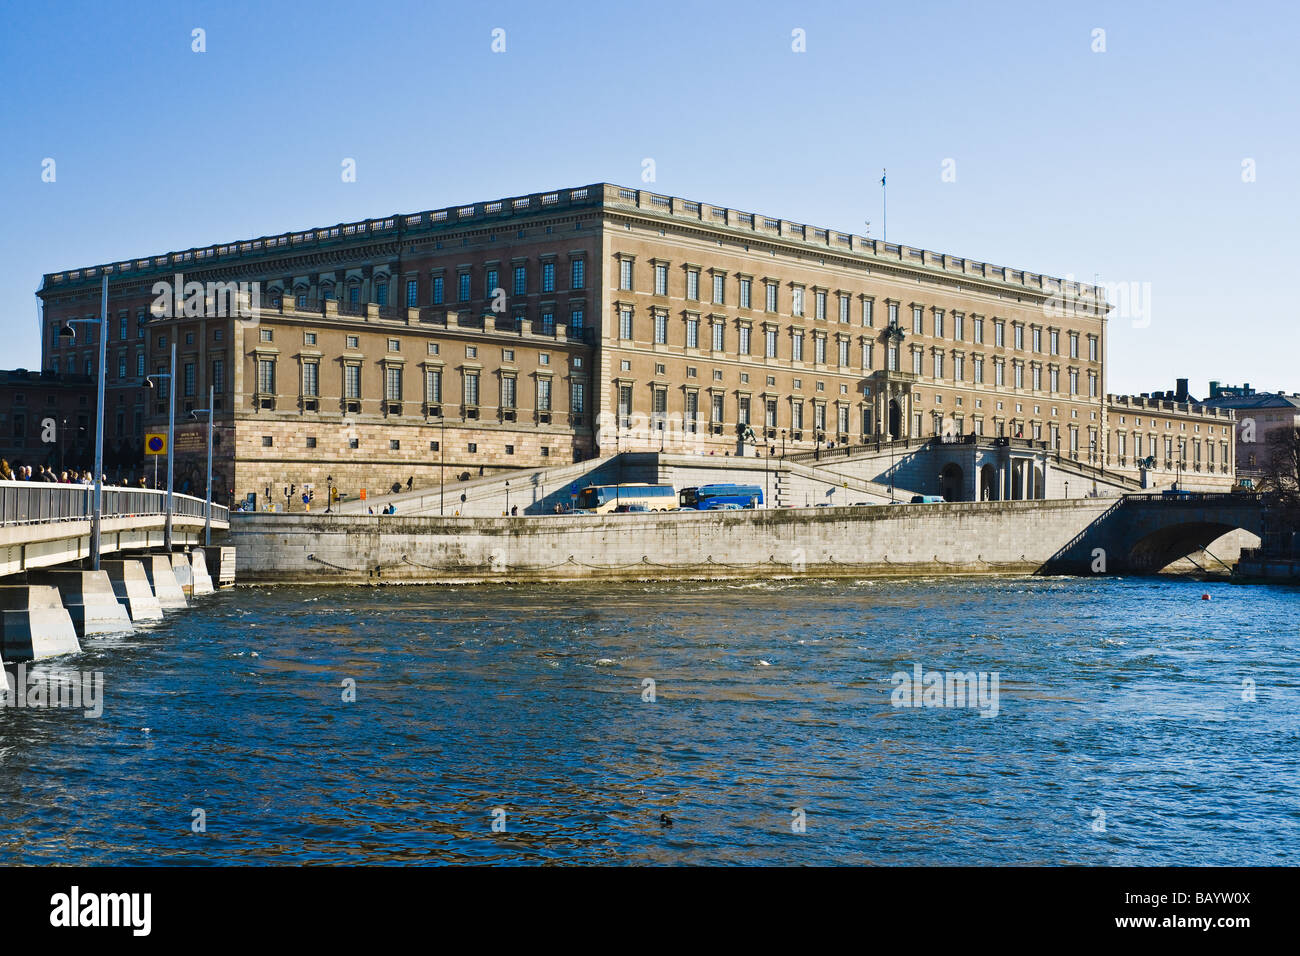 The royal palace by the waterfront in the old town of Stockholm Sweden Stock Photo